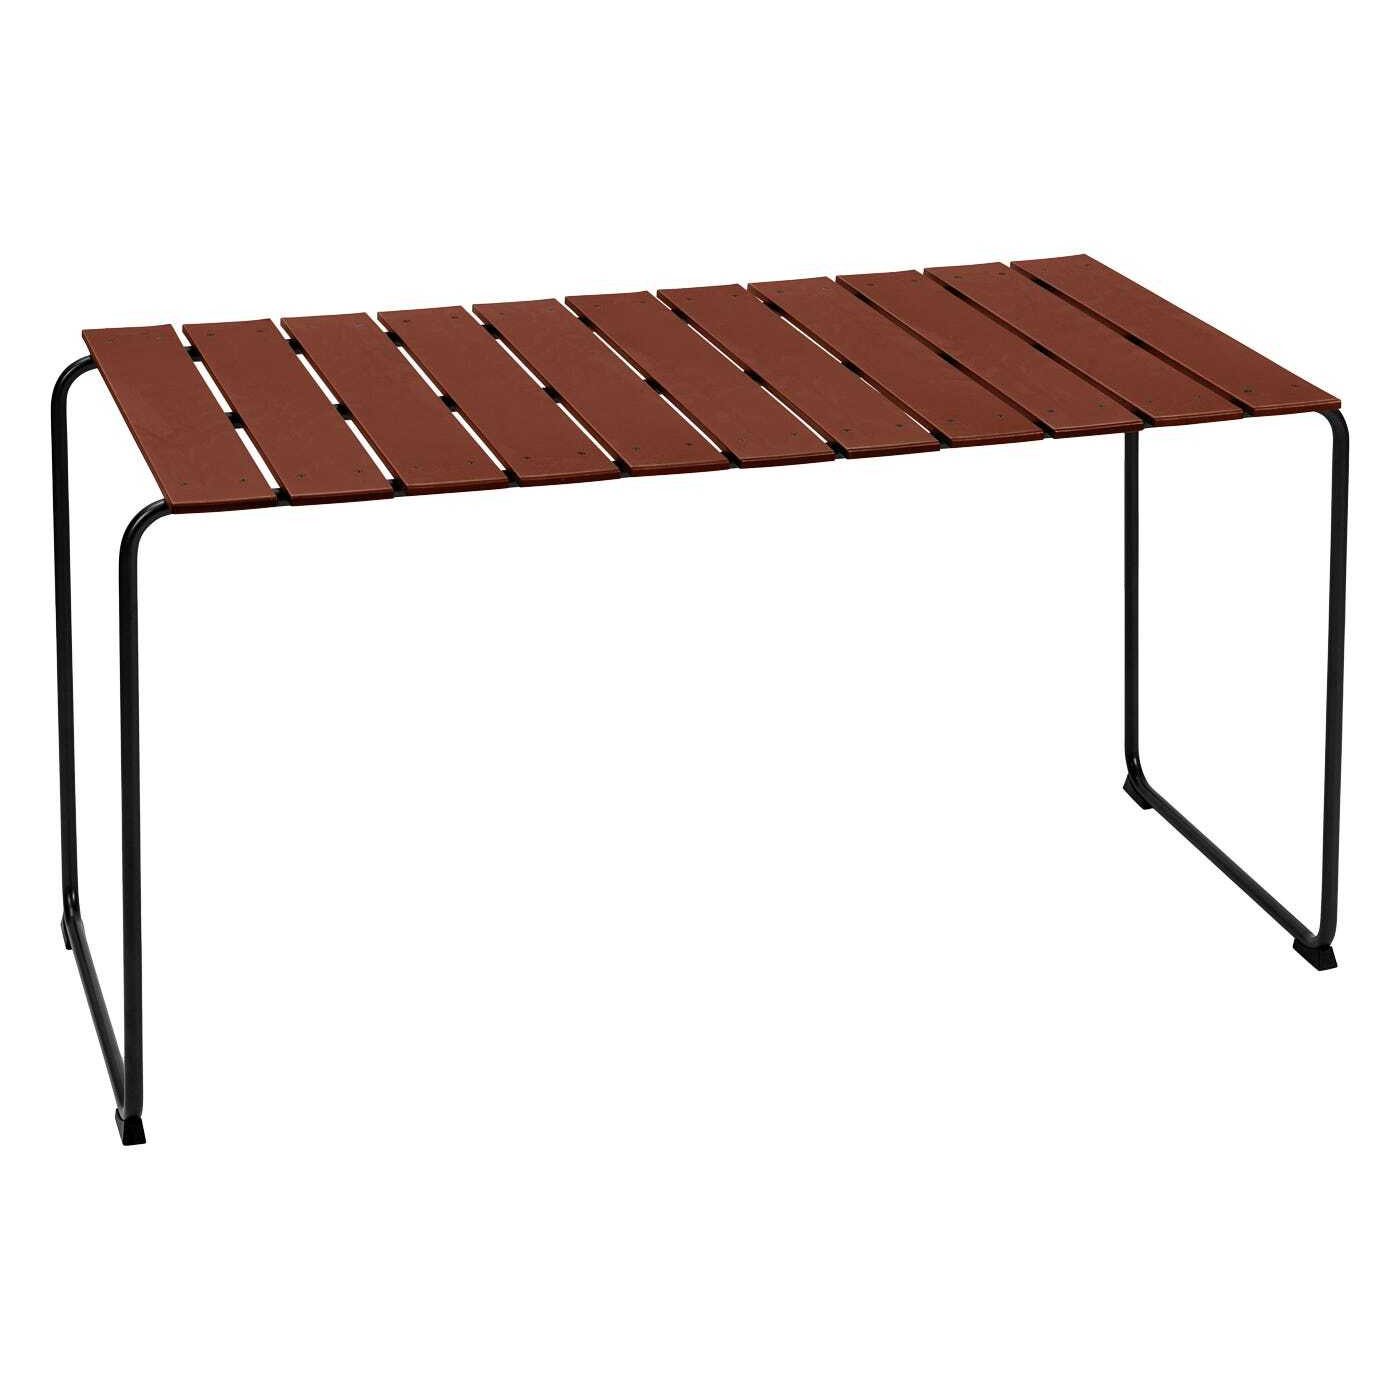 Mater Ocean Outdoor Dining Table in Burnt Red - image 1